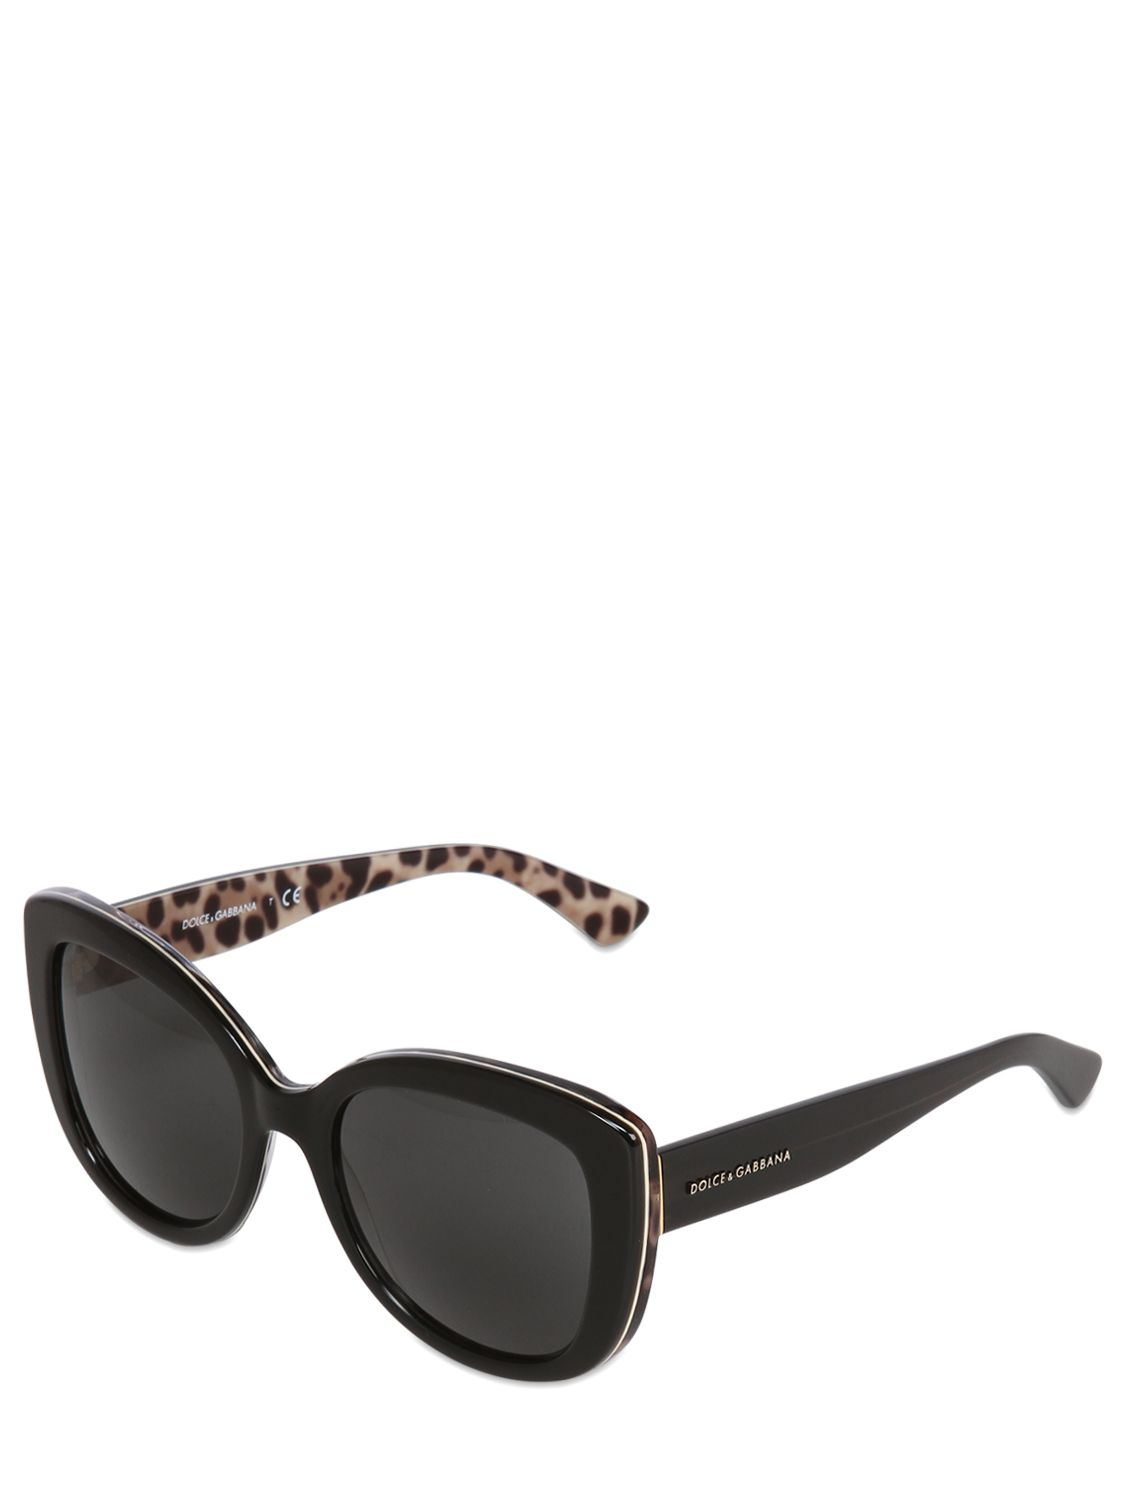 Lyst - Dolce & gabbana Butterfly Shaped Acetate Sunglasses in Black